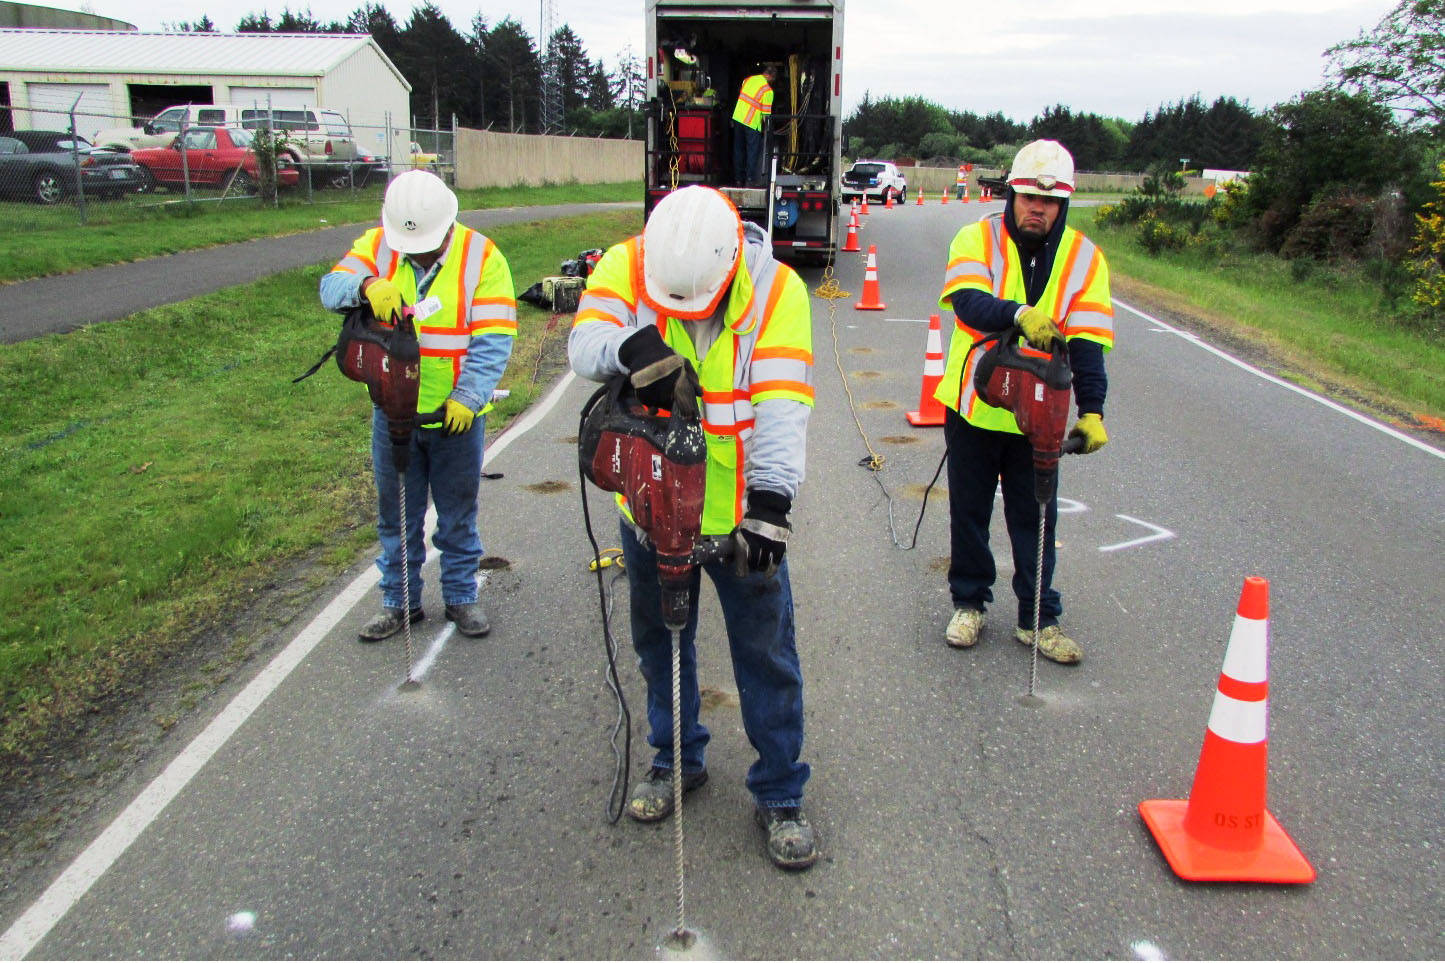 Photo by Scott D. Johnston: Workers from Uretek USA drilled holes in the pavement on Canal Drive in Ocean Shores Thursday as part of preparing for a test of a polyurethane injection process for roadbed stabilization and pavement lifting. The result for the big dip on Canal was that “ride quality is significantly better, but still not perfect,” Ocean Shores Public Works Director Nick Bird said.